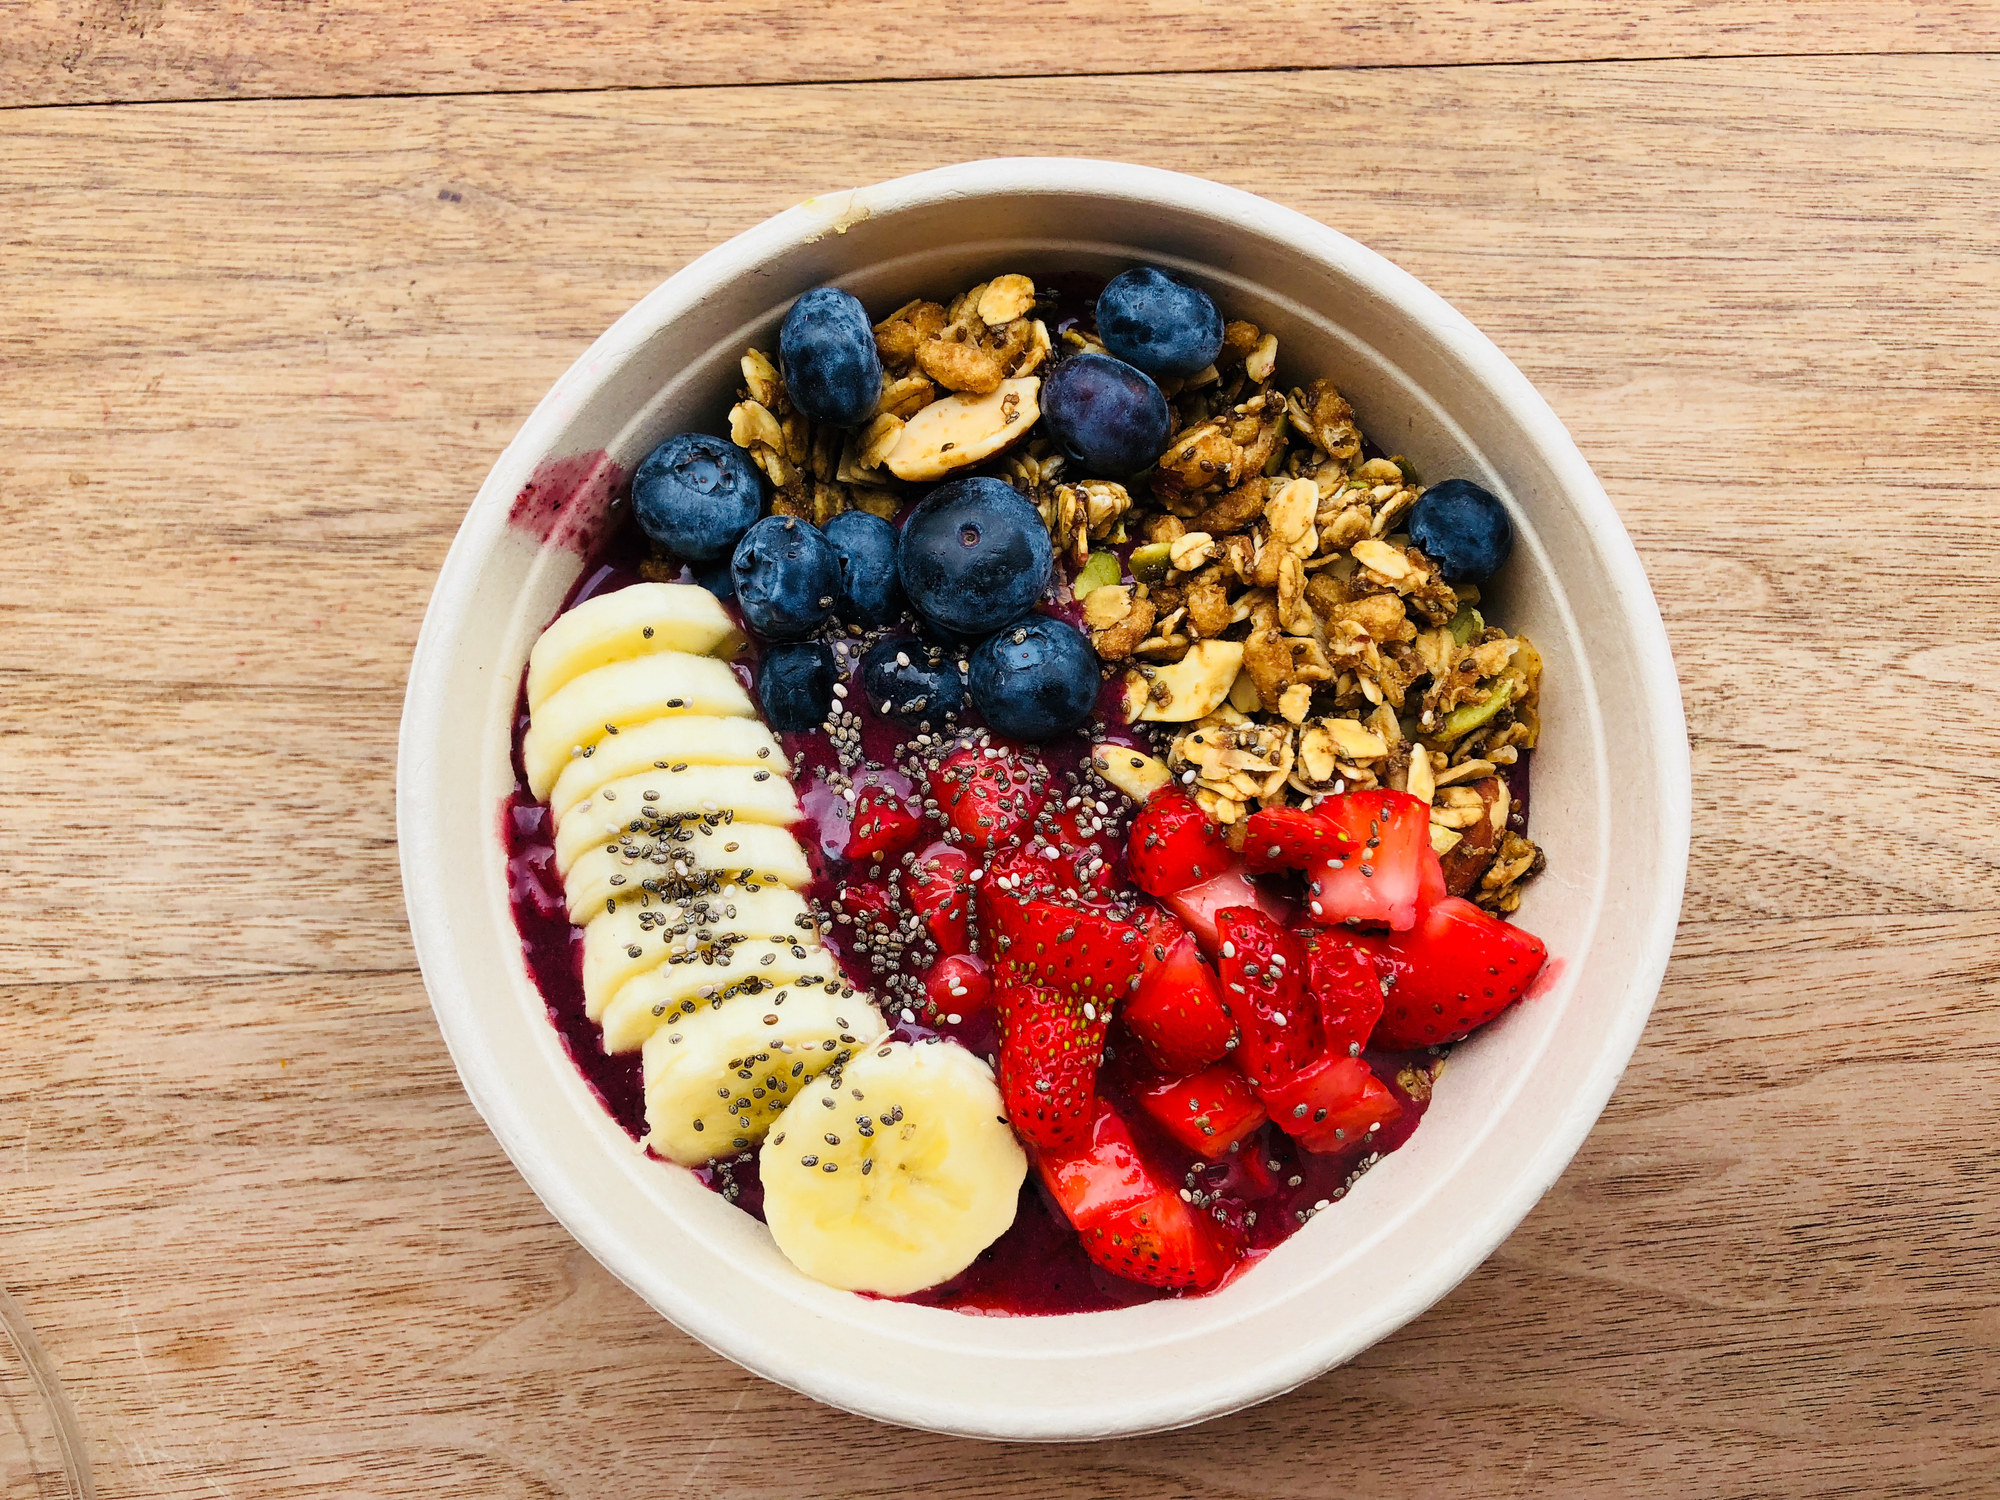 Acai bowl with fruits and seeds.